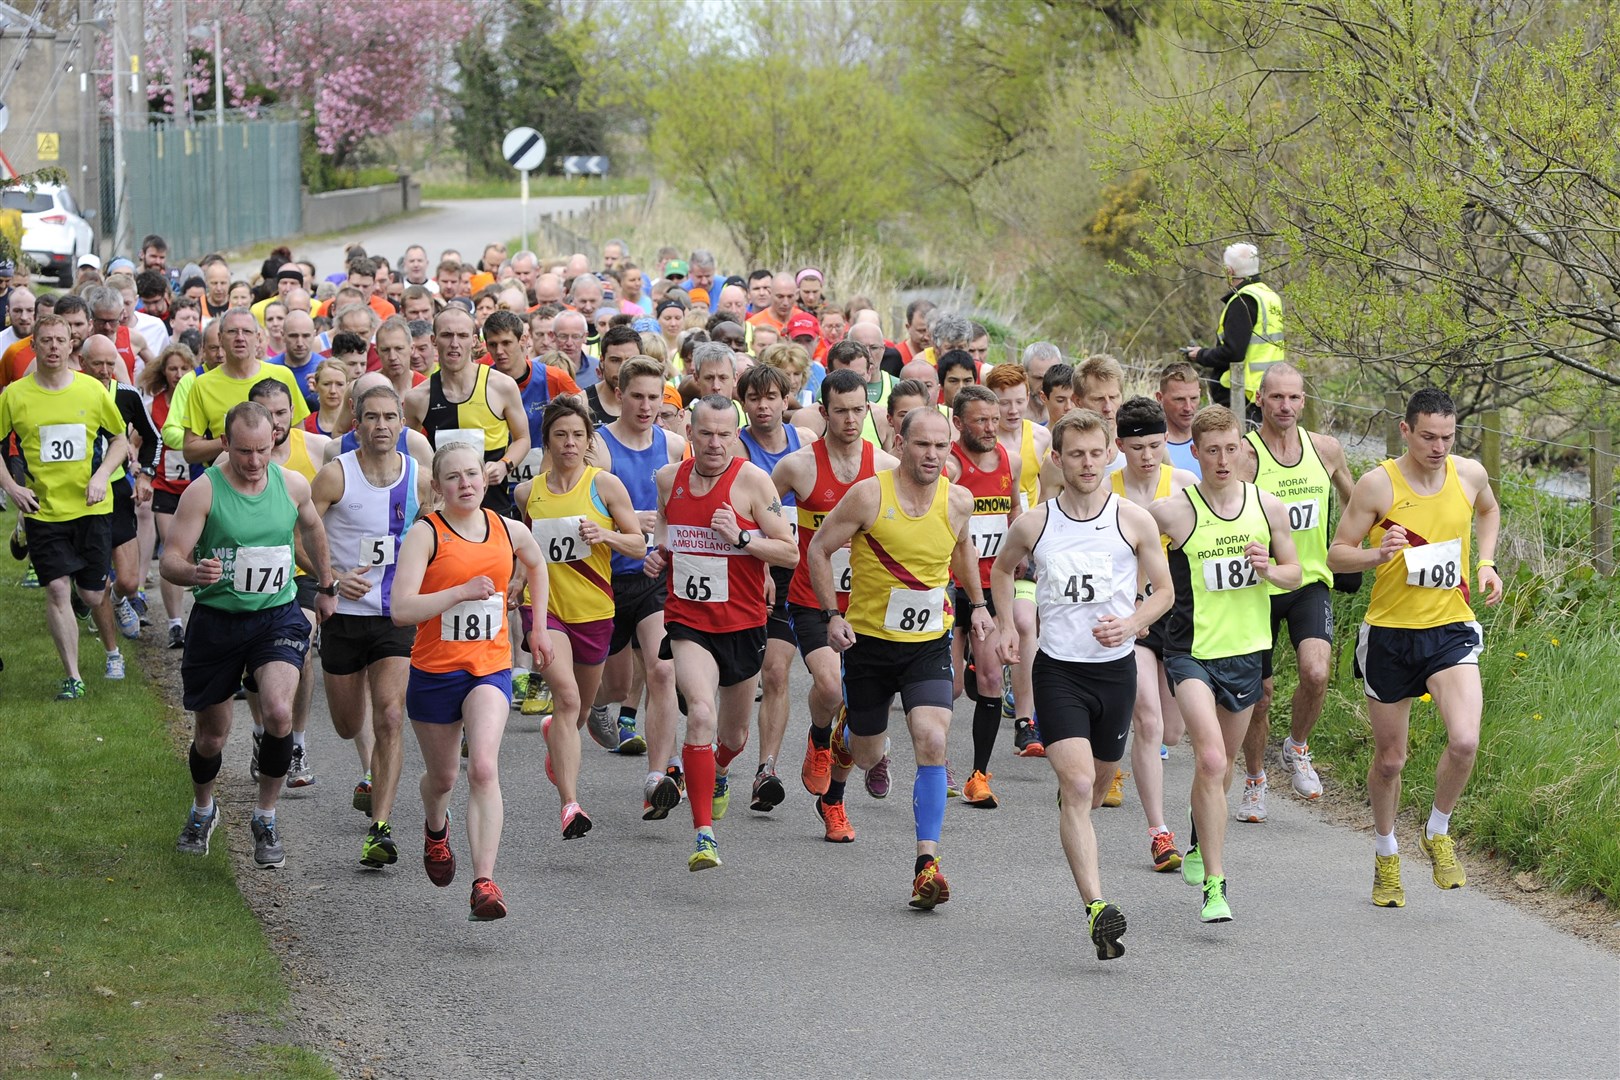 2016 Forres Harriers Benromach 10K Race...Start of the race...Picture: Daniel Forsyth. Image No.033560.